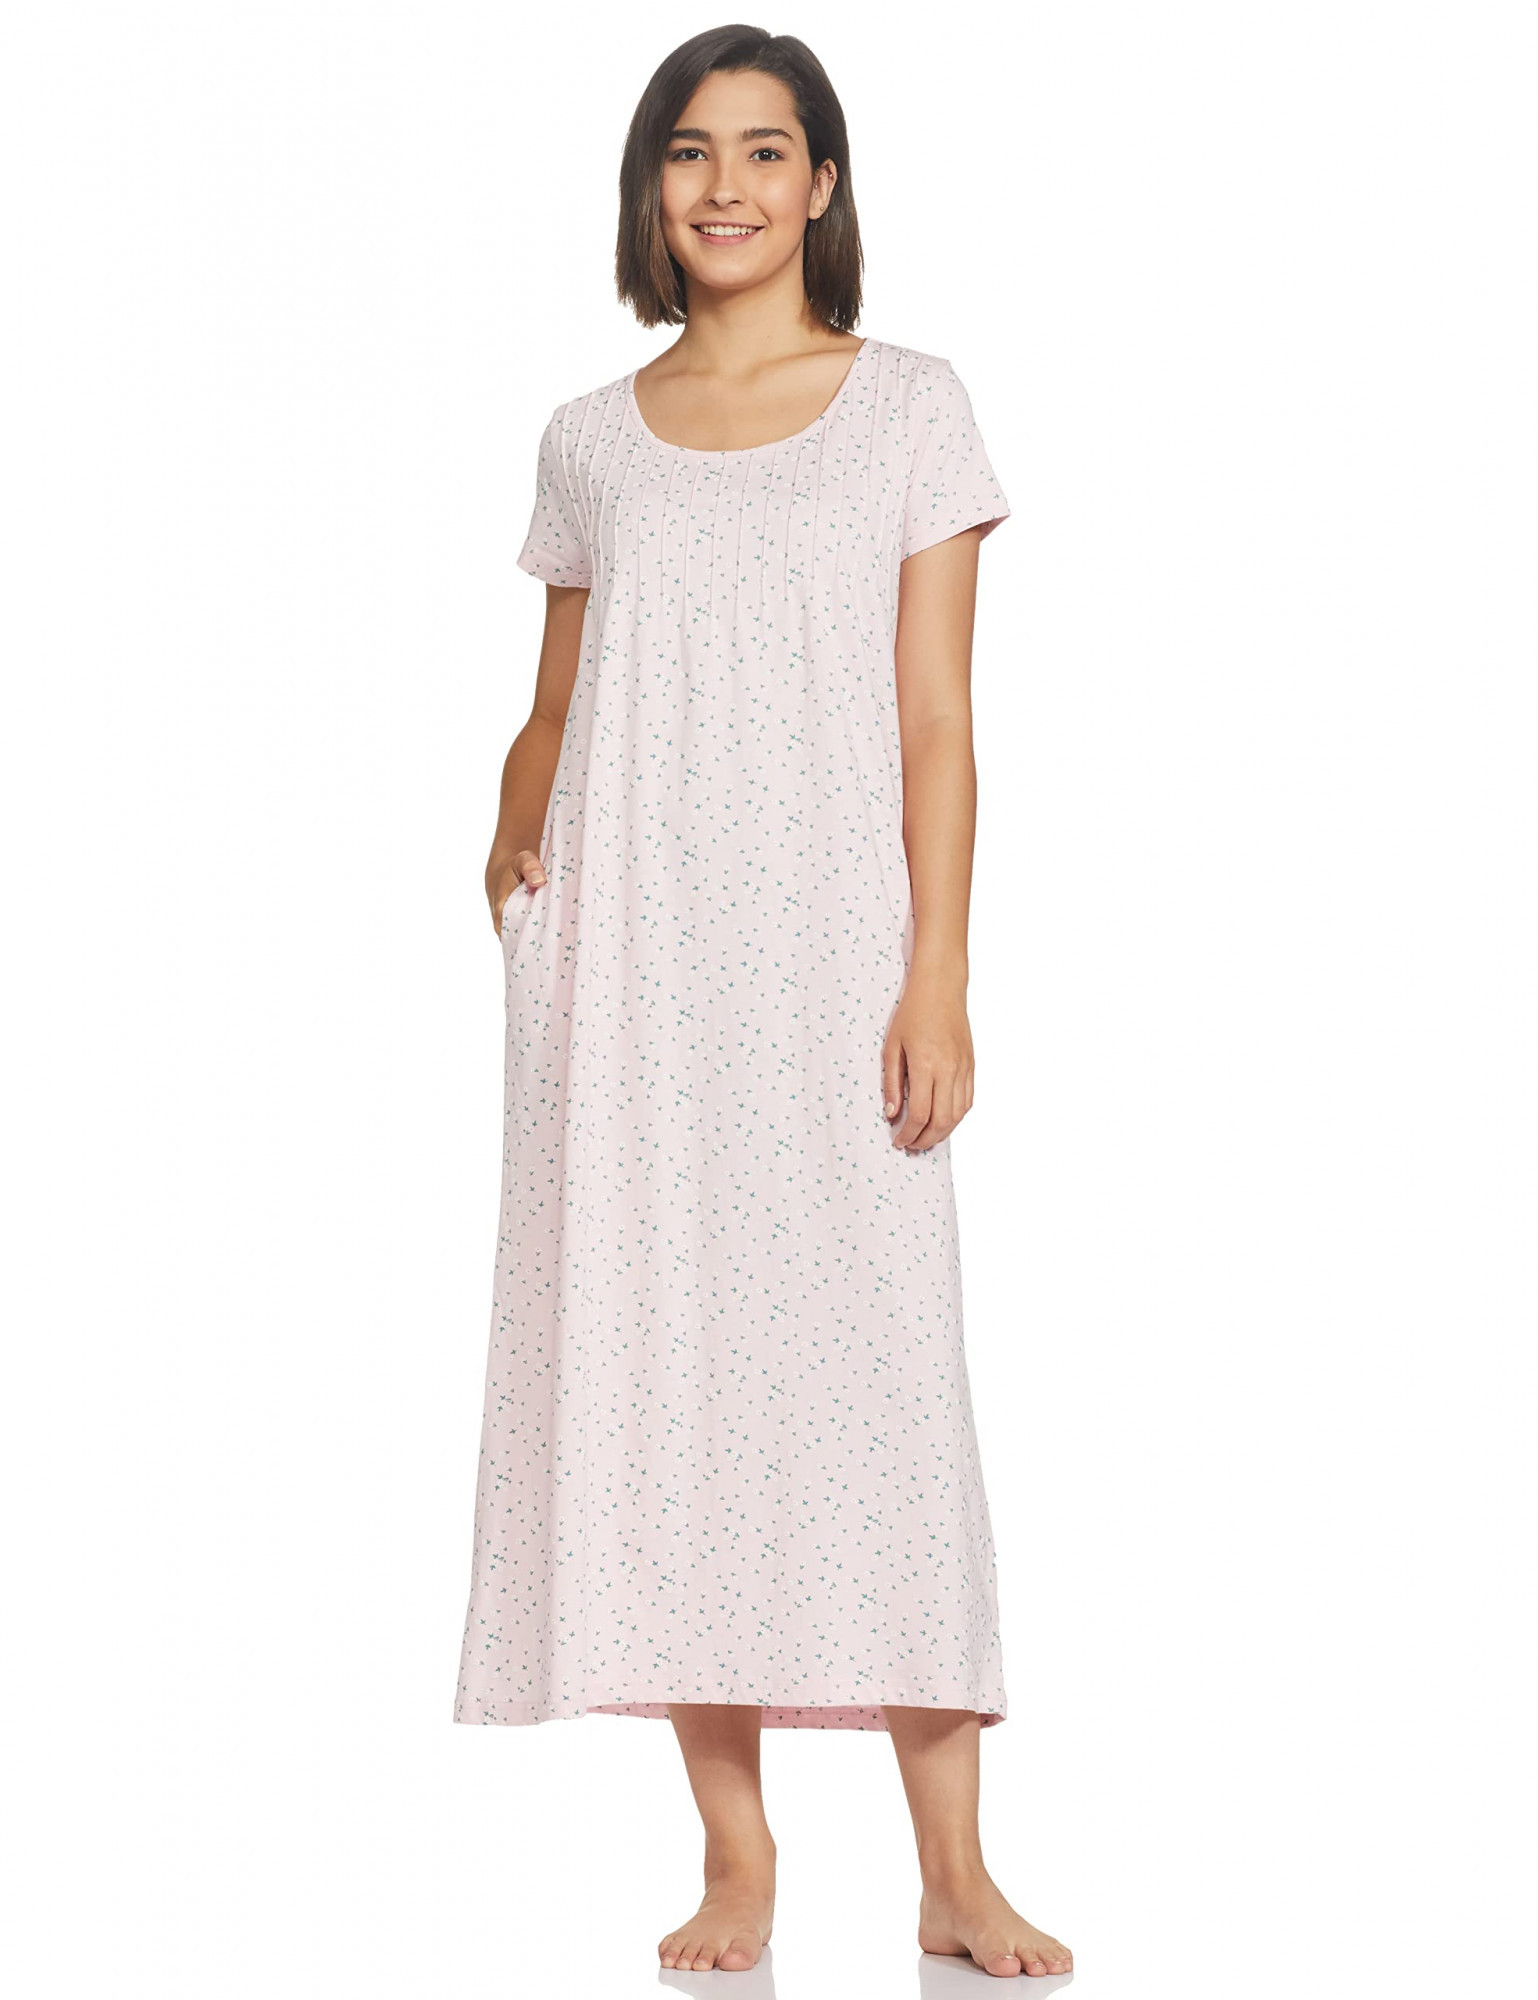 Buy Trimes Soft Cotton Night Gown for Women with Floral Printed  Design|Stylish & Comfortable|with Elegant Floral Print |U Neck Shape with  Button Closure| Red - Large at Amazon.in